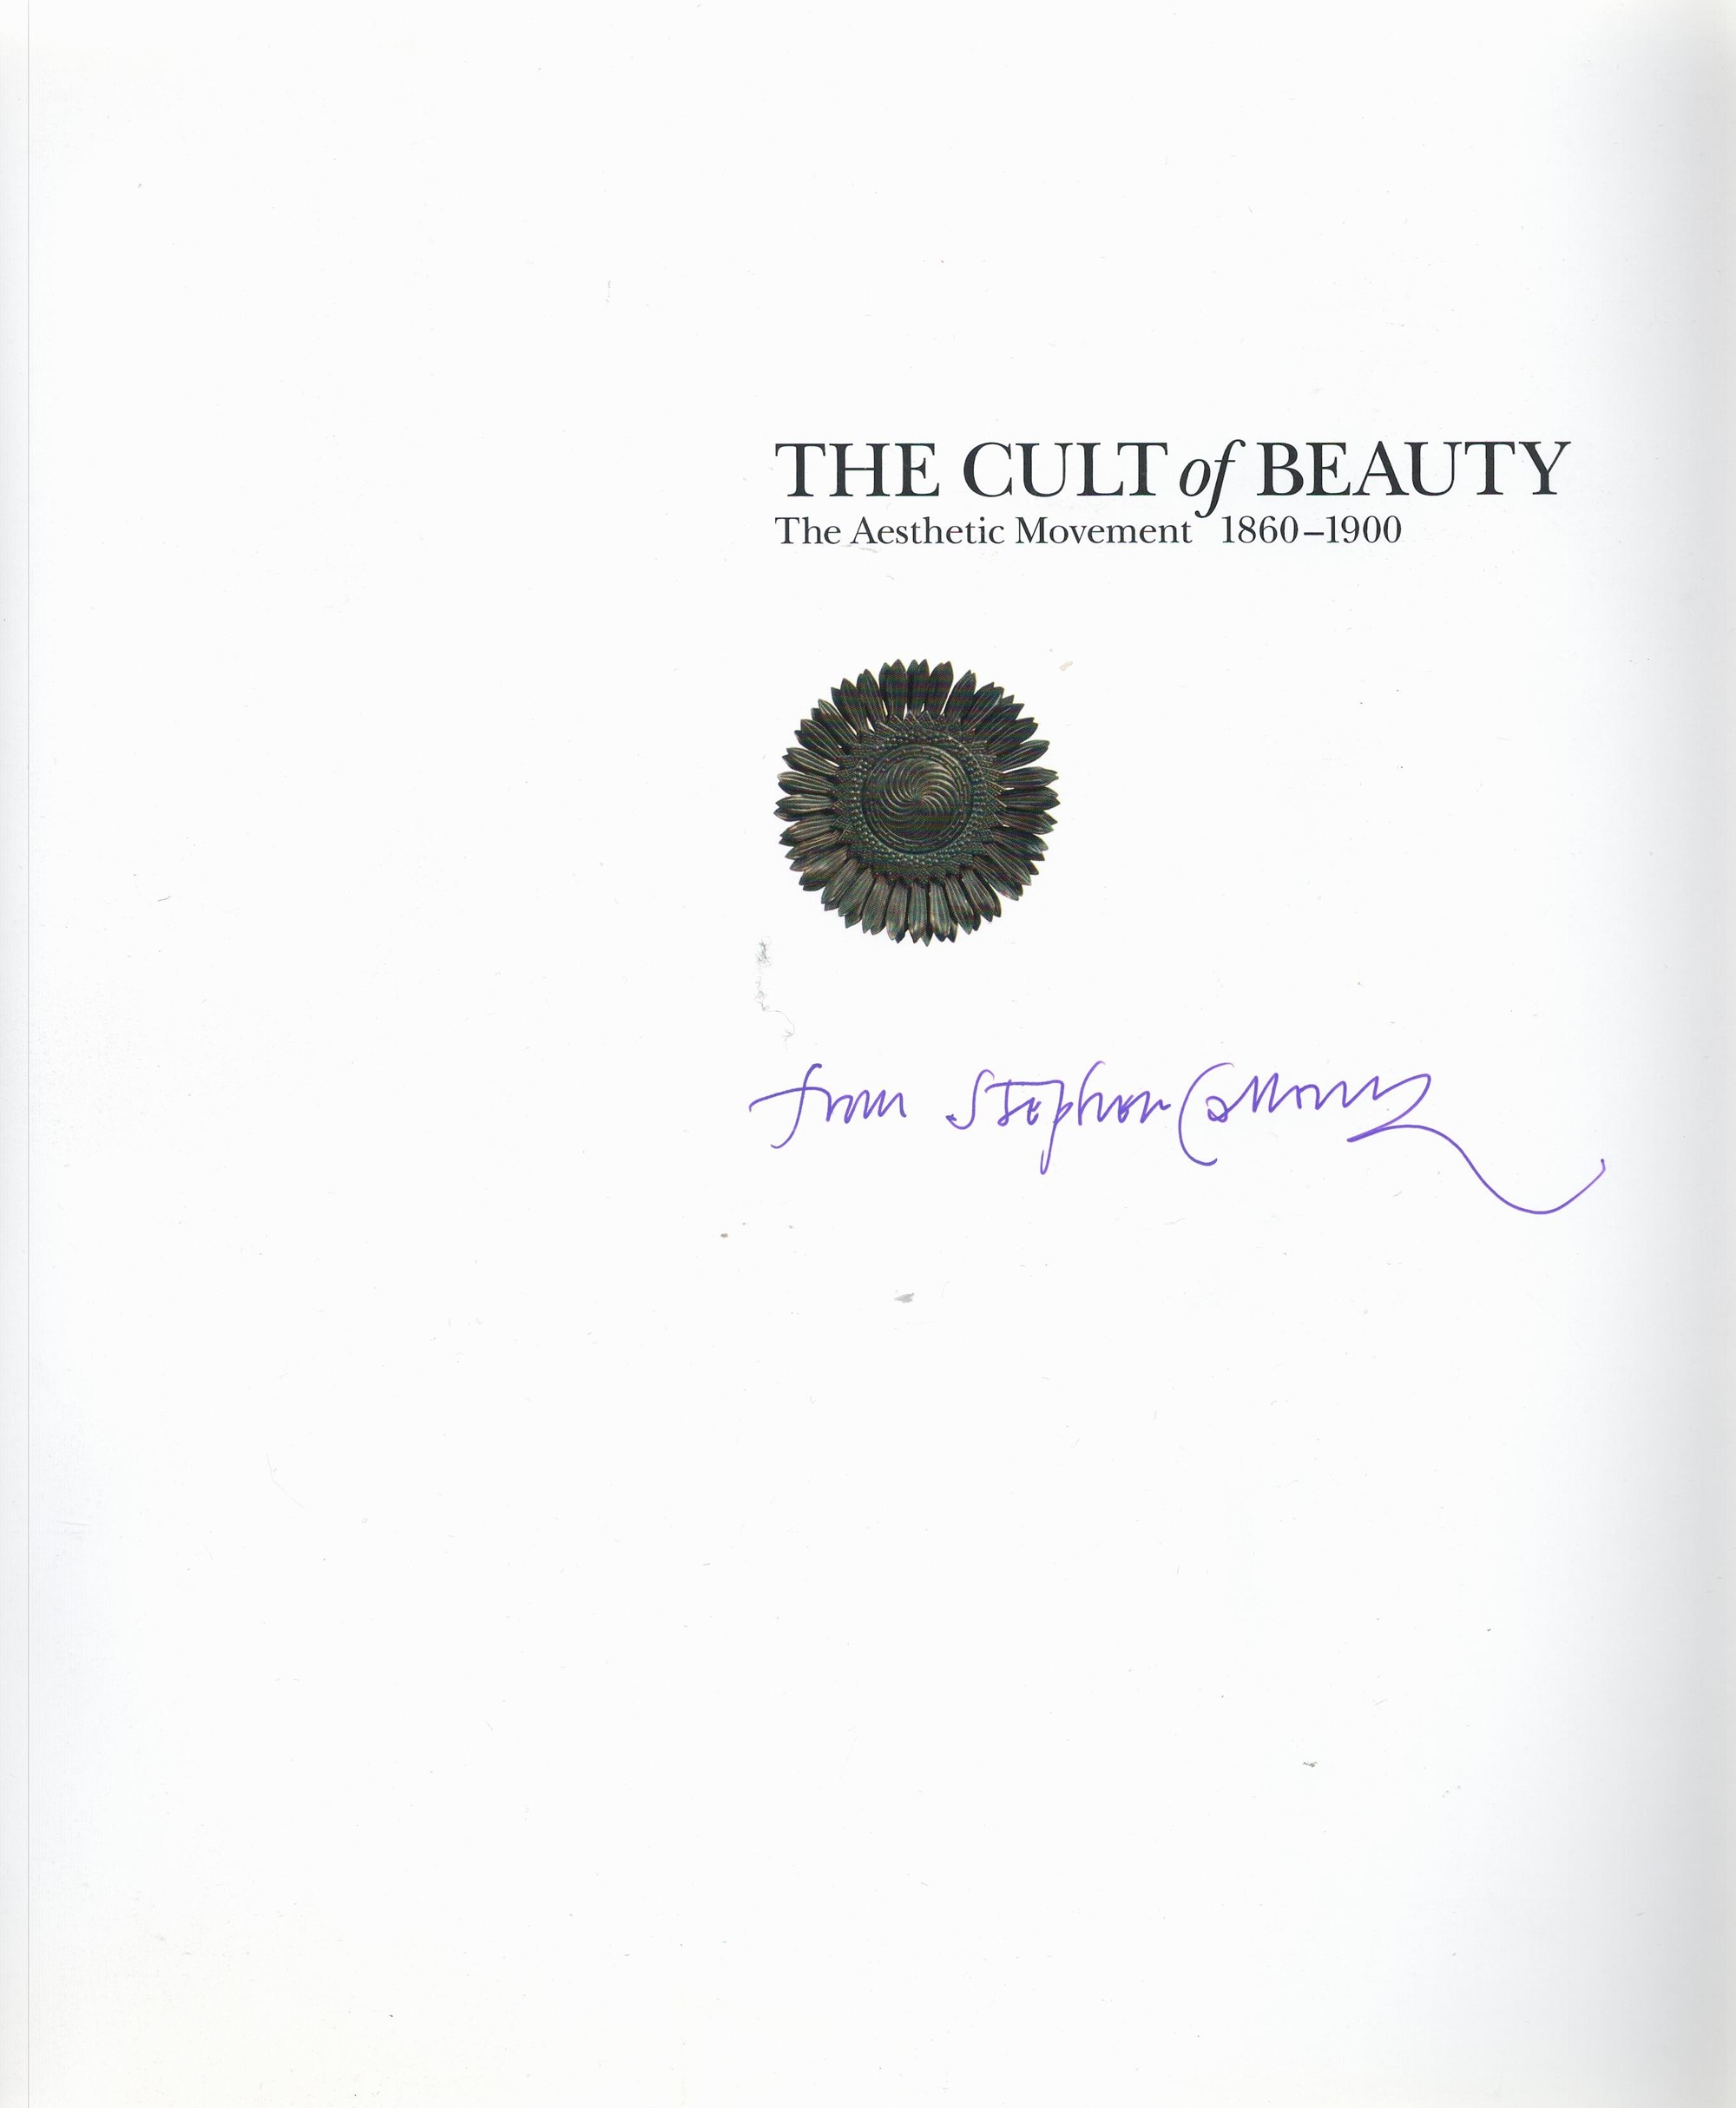 Signed Book Stephen Calloway The Cult of Beauty Softback Book 2011 First Edition Signed by Stephen - Image 4 of 6